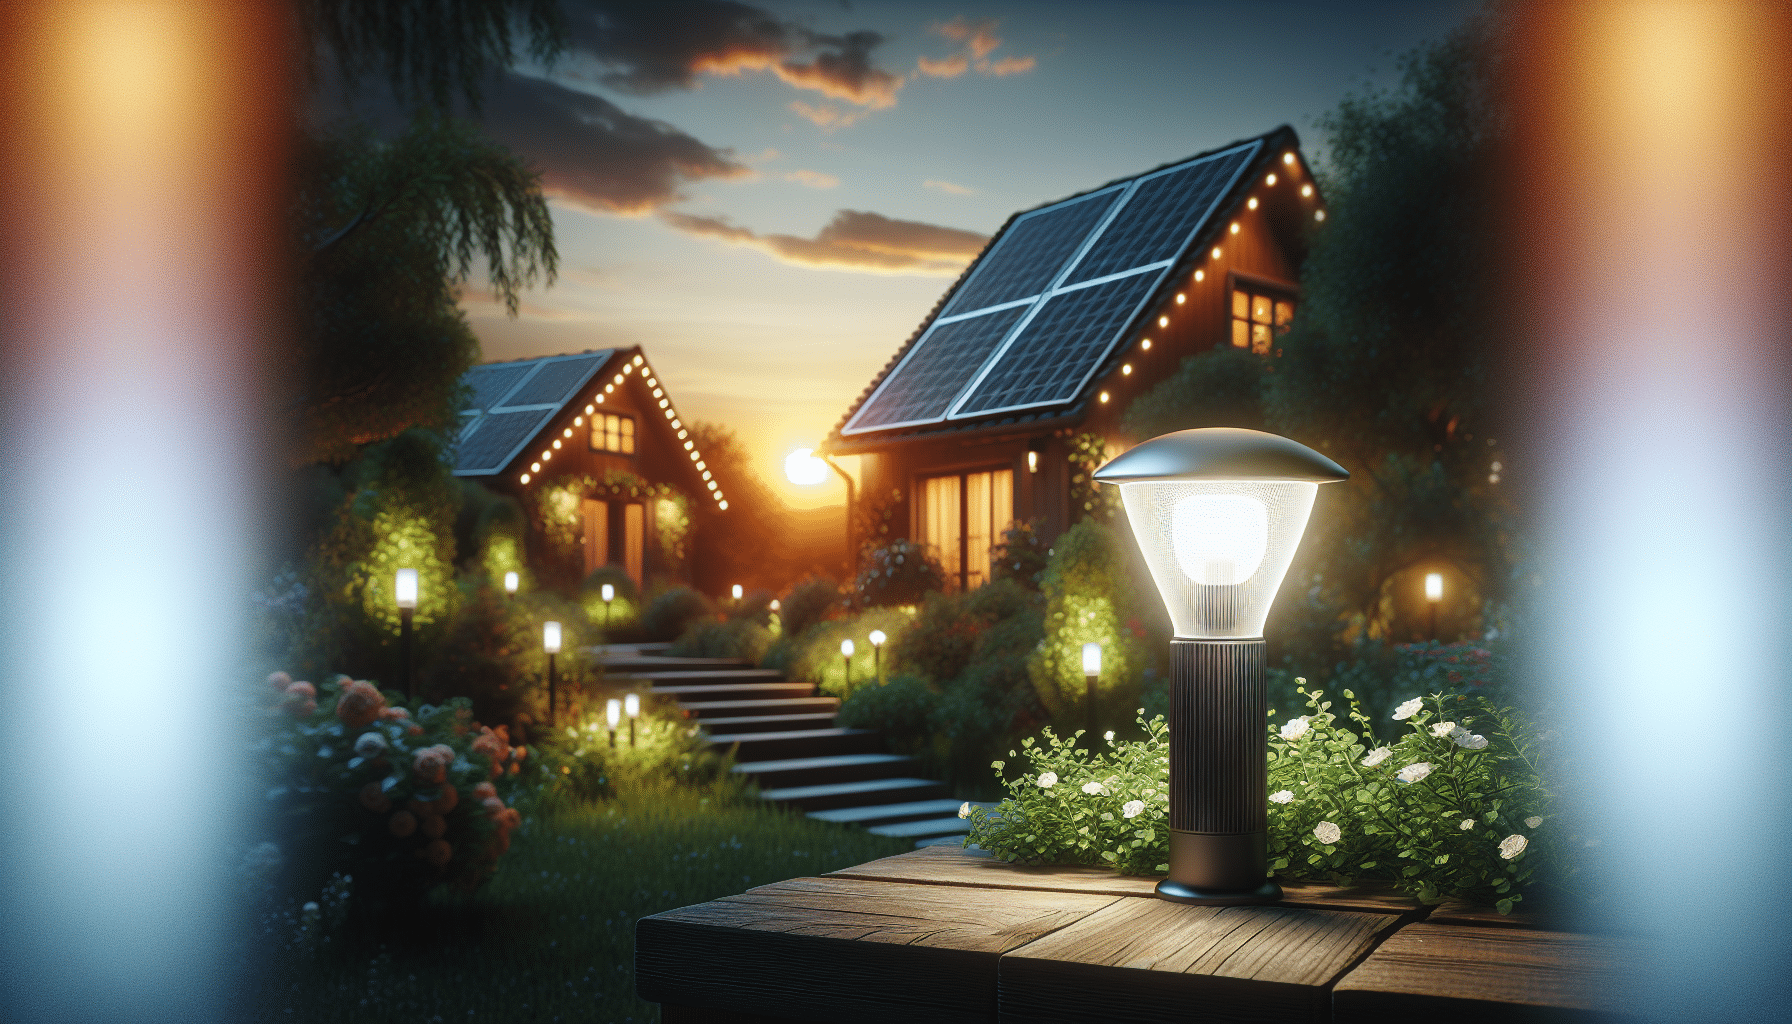 LETMY Solar Outdoor Lights, 8 Pack Bright Solar Pathway Lights Outdoor Waterproof, Up to 12 Hrs Auto On/Off Solar Garden Lights Outdoor Solar Lights for Outside Yard Patio Walkway Driveway - Bronze